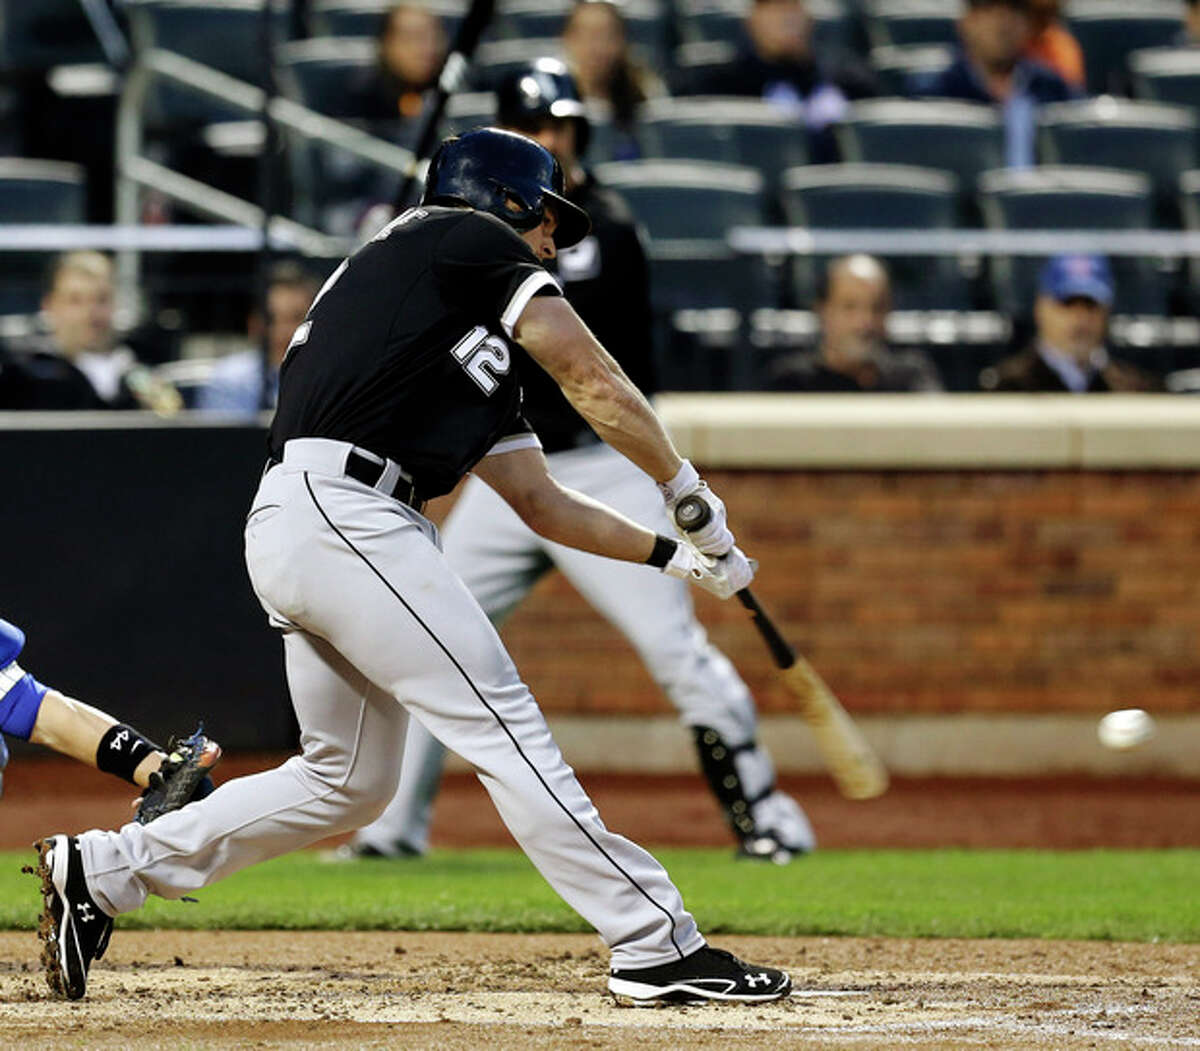 Chicago White Sox's Conor Gillaspie hits a two-RBI double during the third inning of a baseball game against the New York Mets at Citi Field, Wednesday, May 8, 2013 in New York. (AP Photo/Seth Wenig)